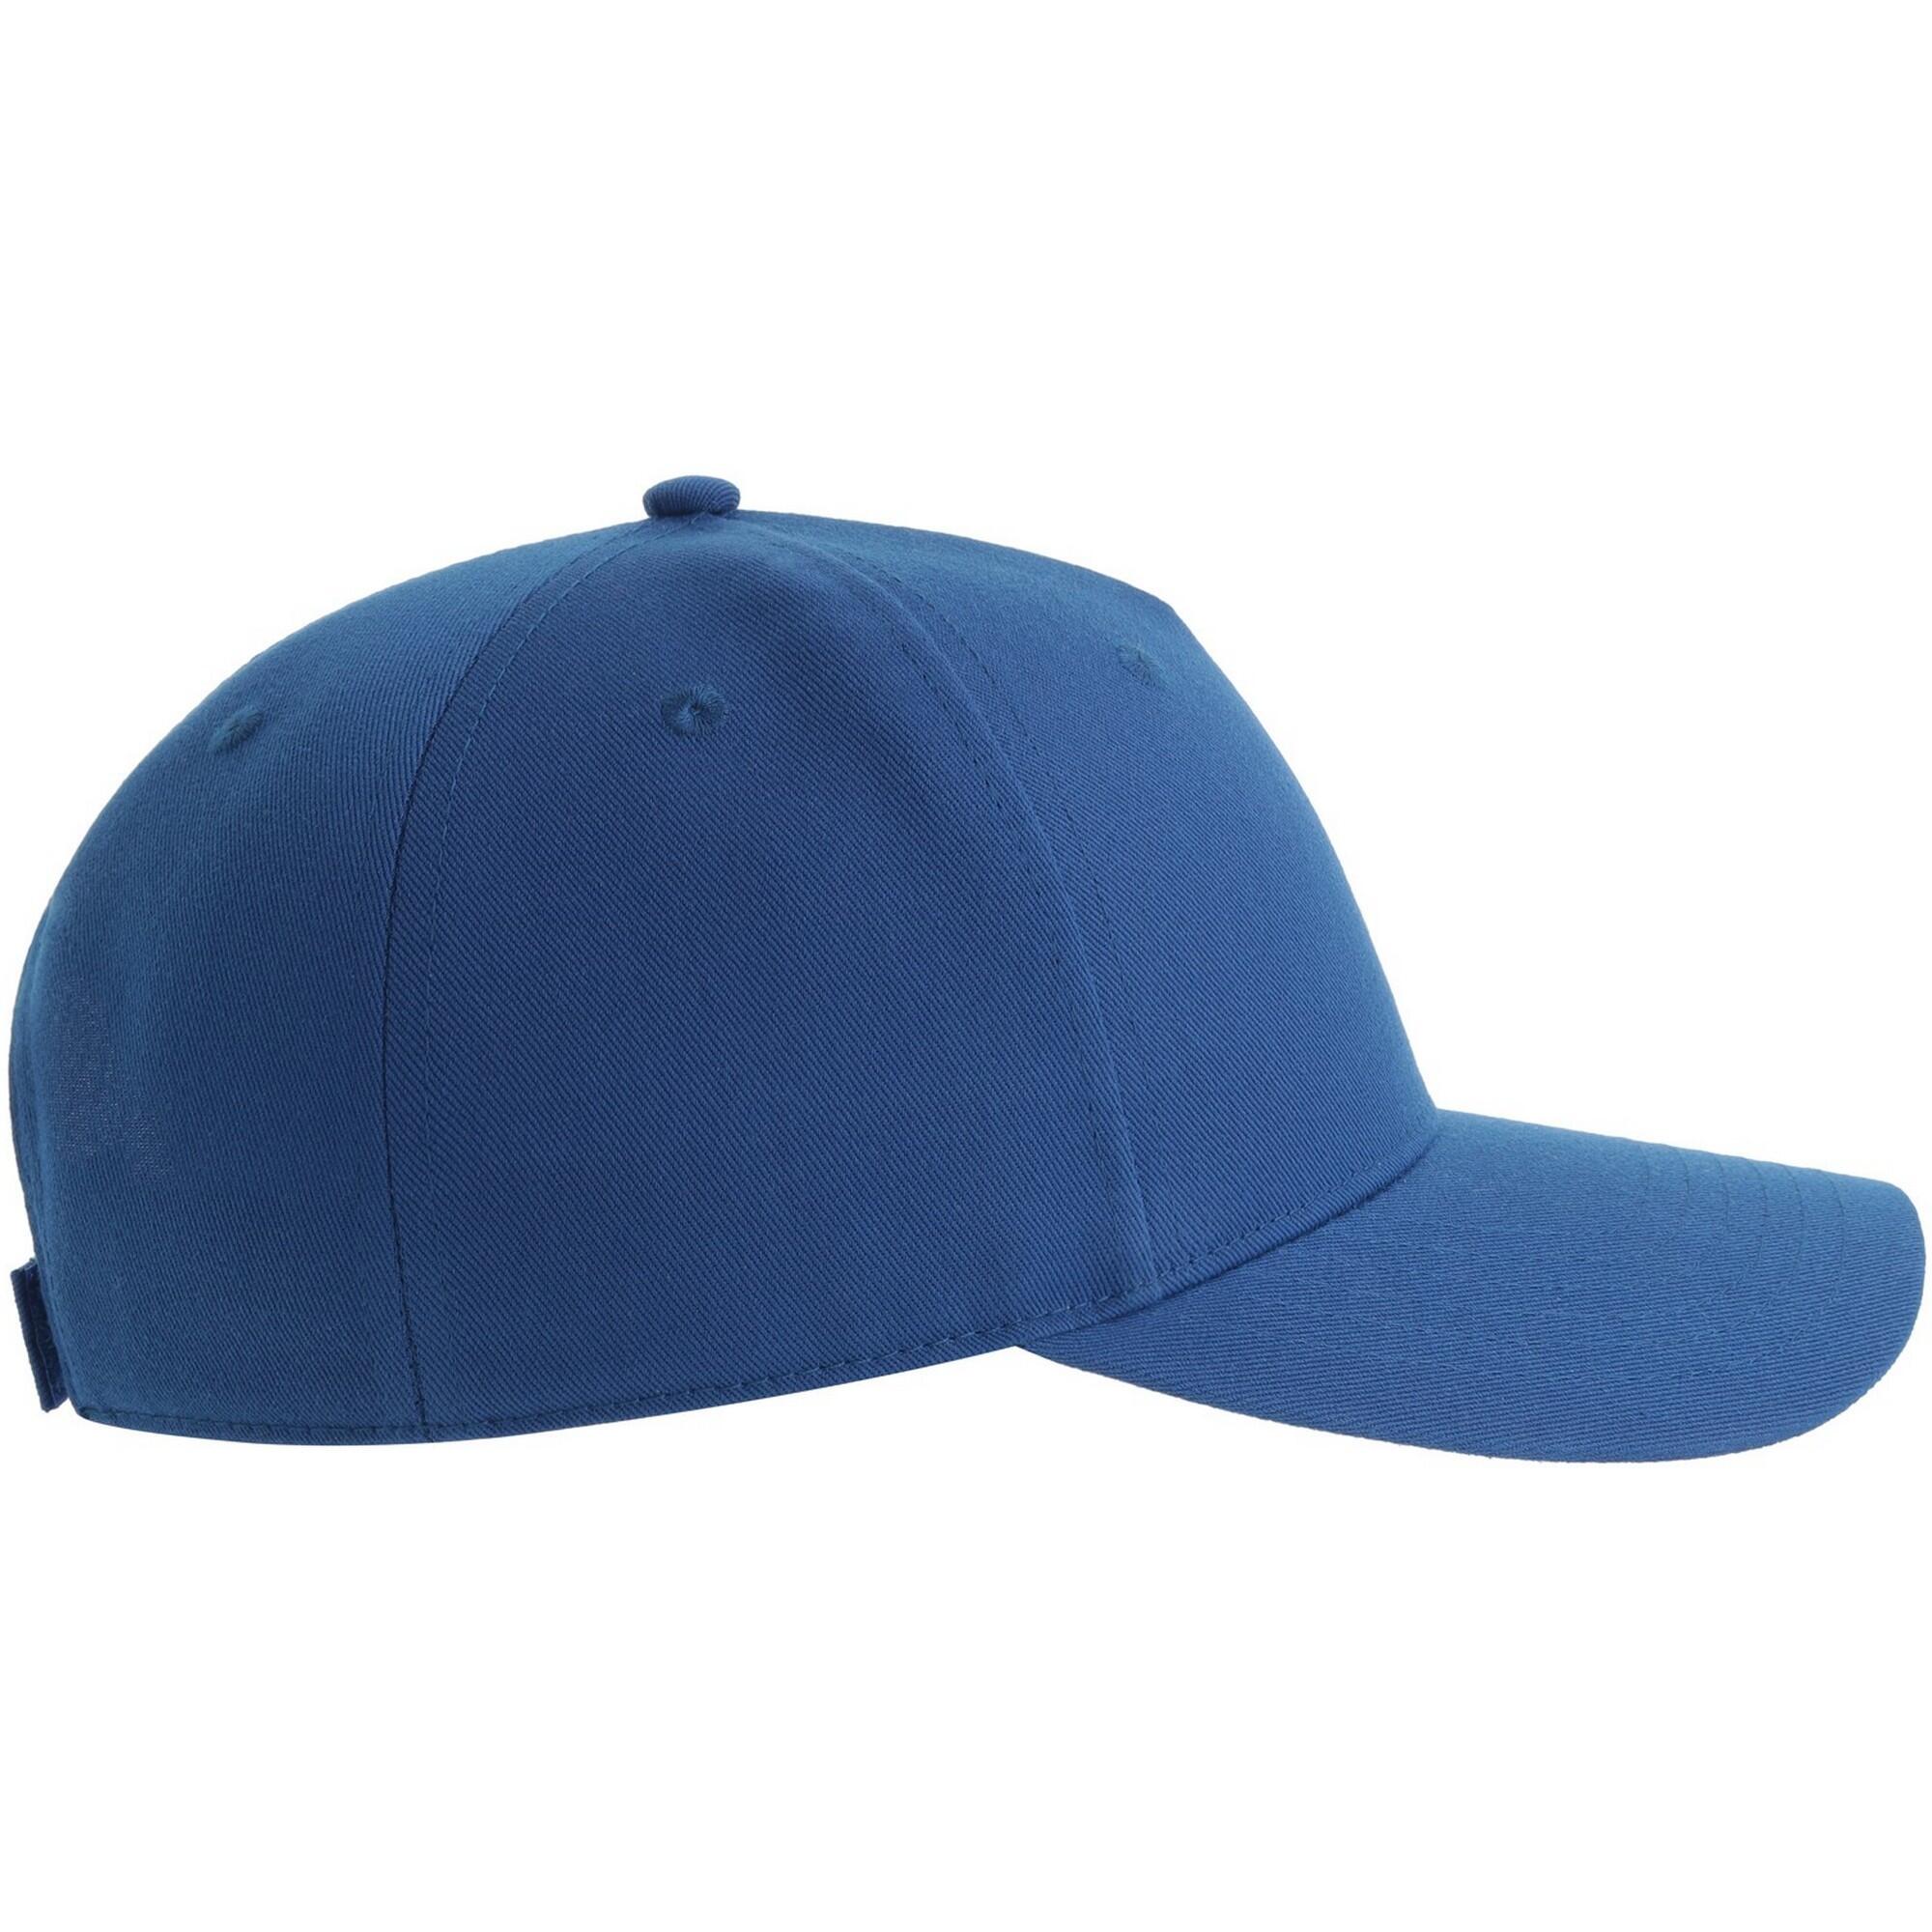 Unisex Adult Fiji Recycled Polyester Cap (Royal Blue) 1/3